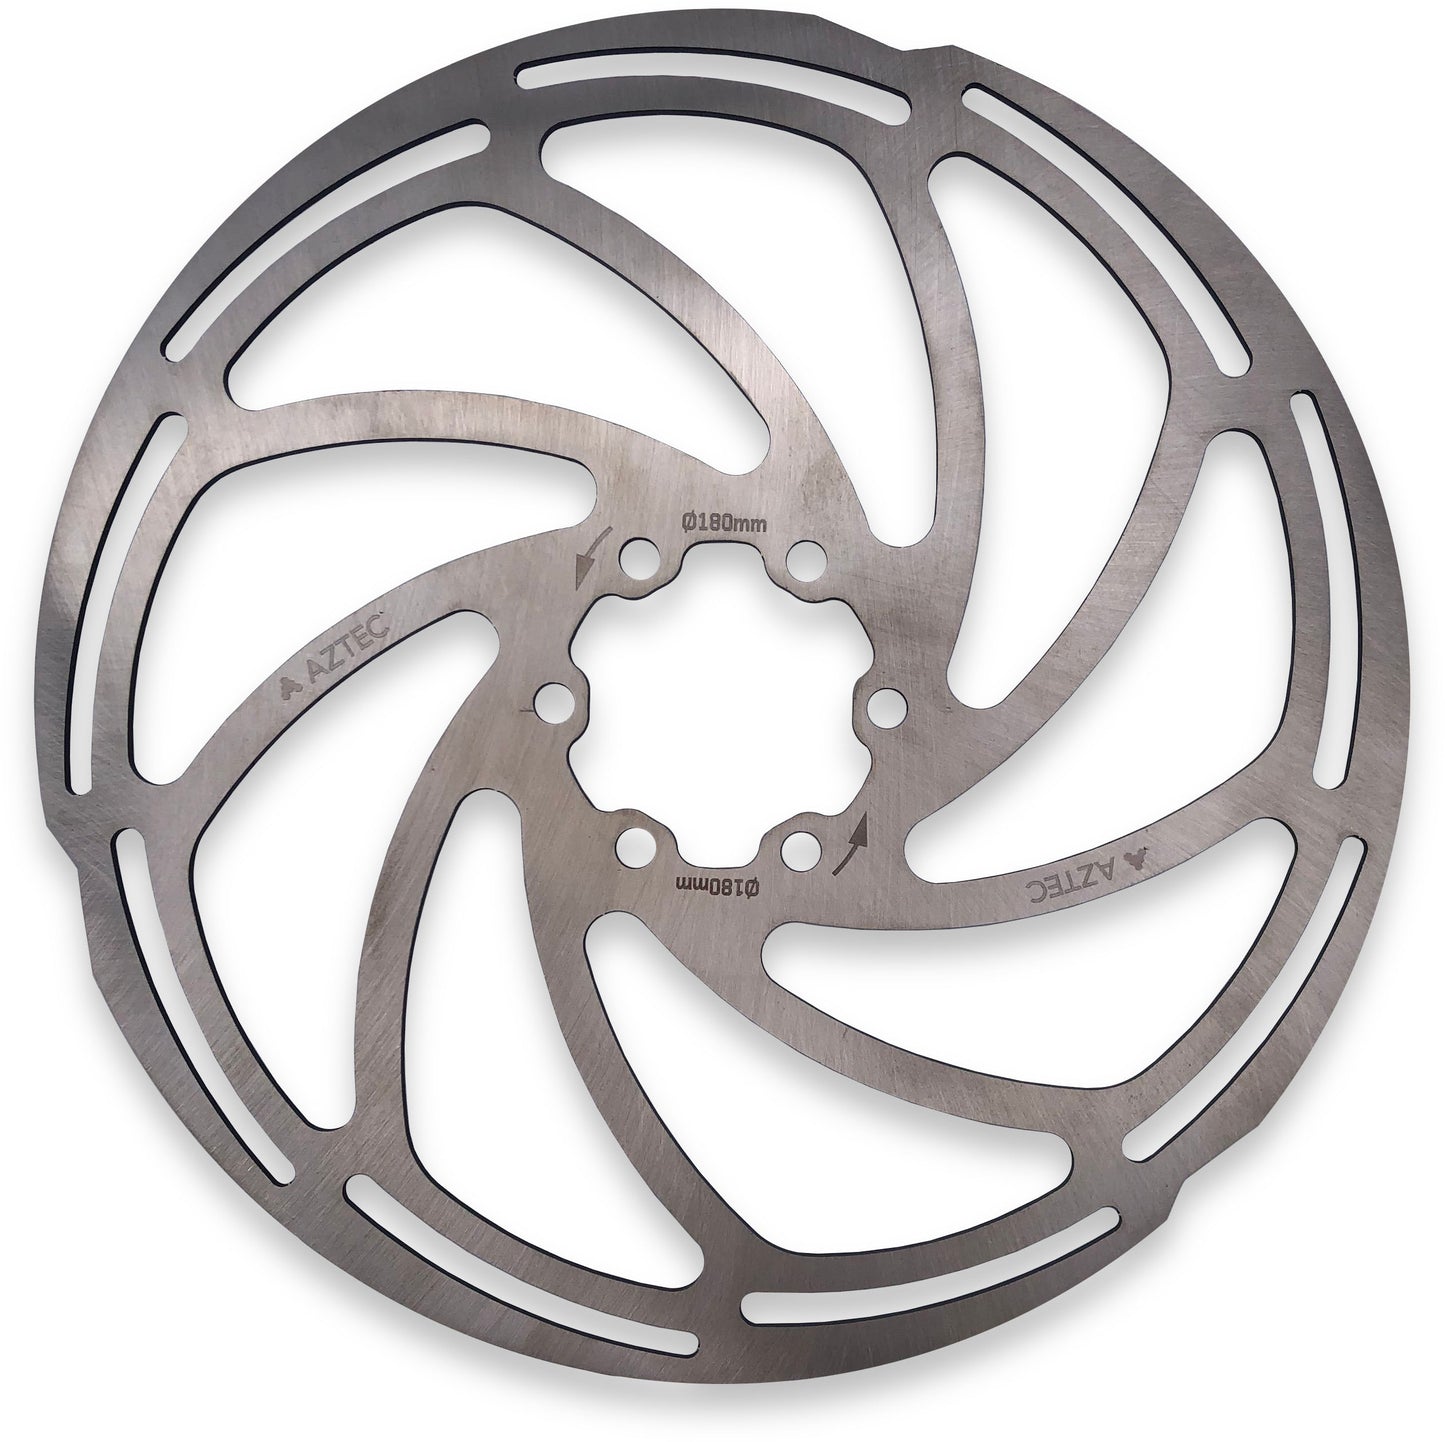 AZTEC FIXED STAINLESS STEEL 6 BOLT DISC ROTOR - 140MM